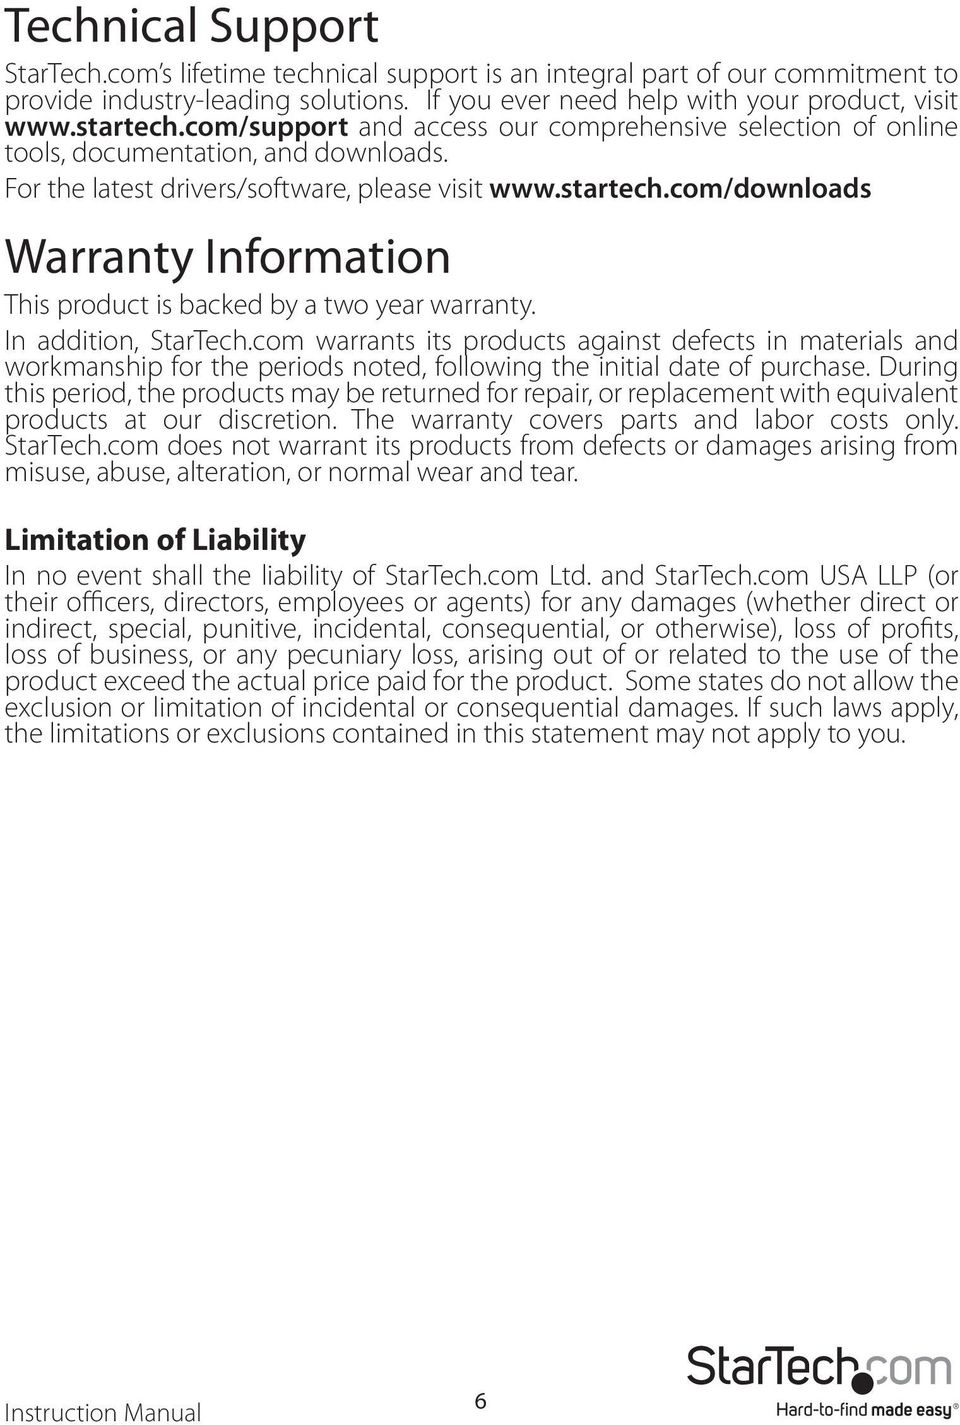 com/downloads Warranty Information This product is backed by a two year warranty. In addition, StarTech.